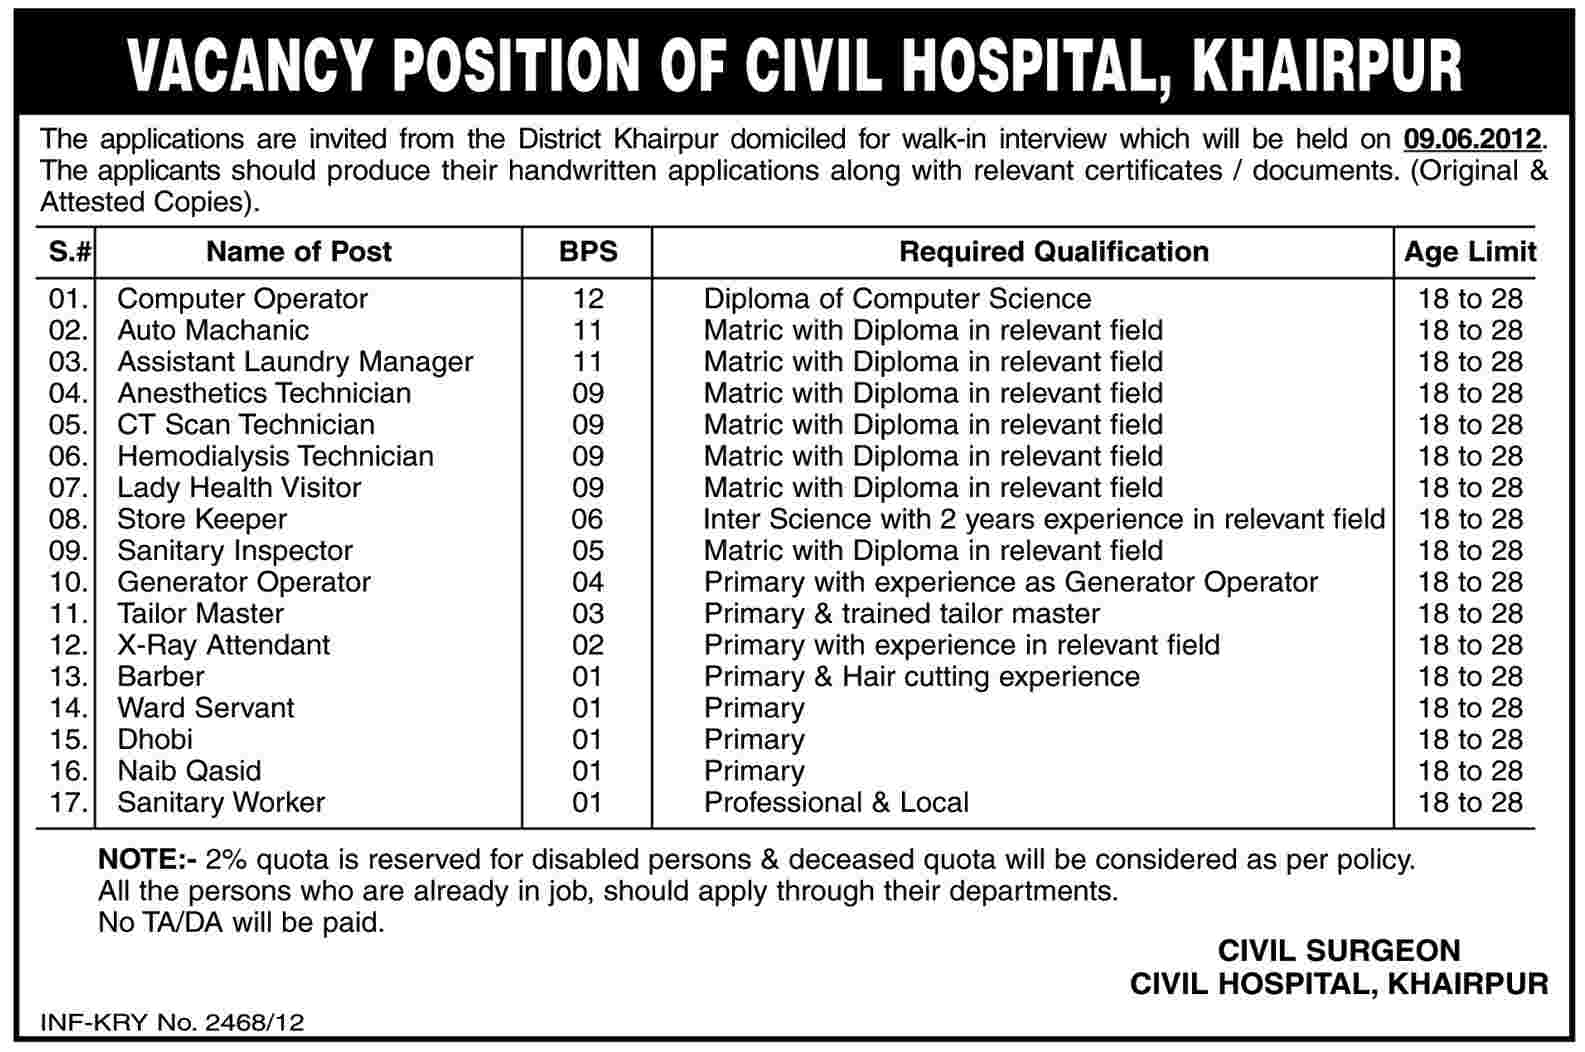 Medical Technicians and Support Staff Required at Civil Hospital